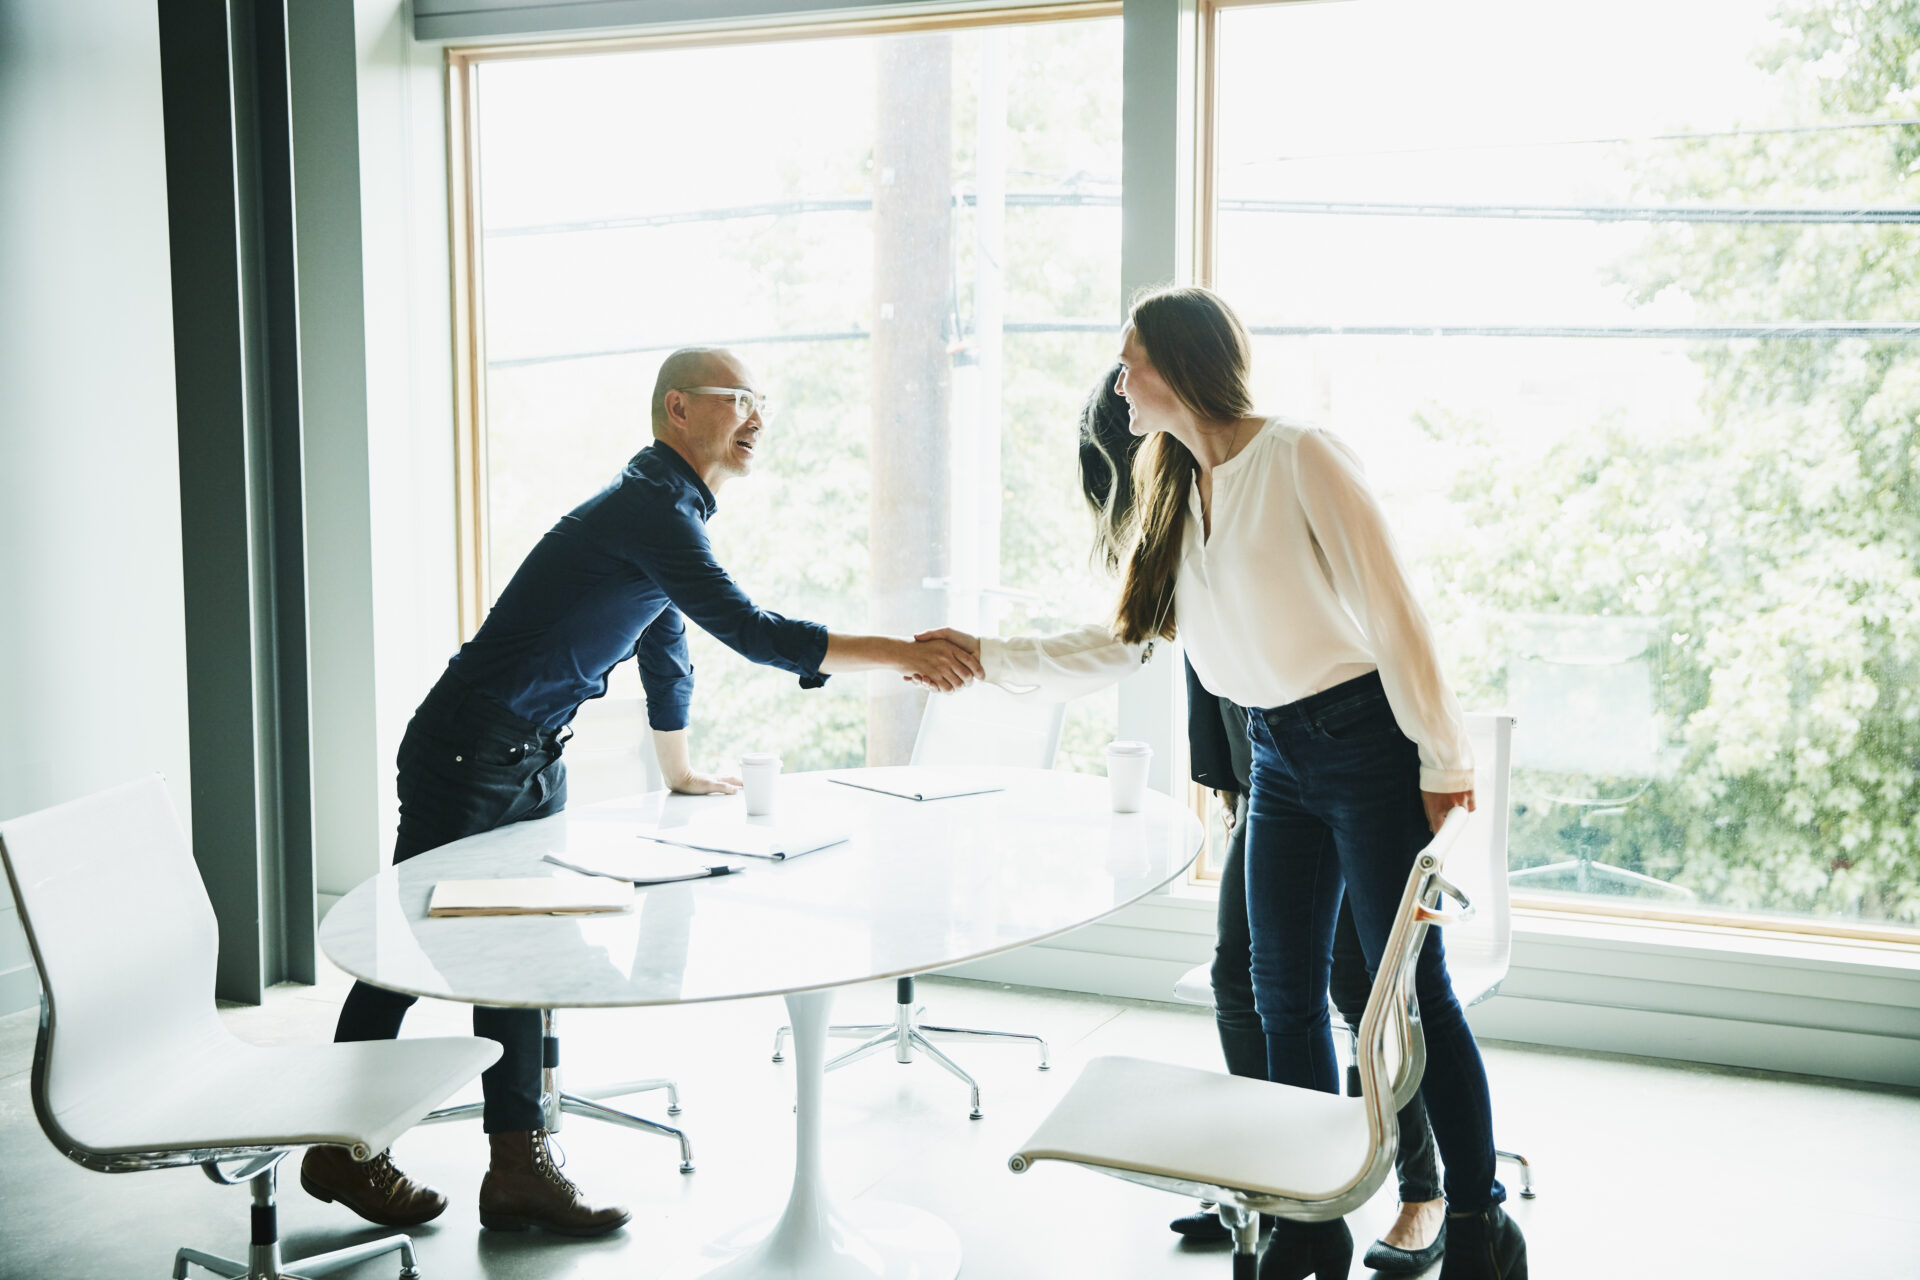 Businesswoman shaking hands with client before meeting in office conference room.